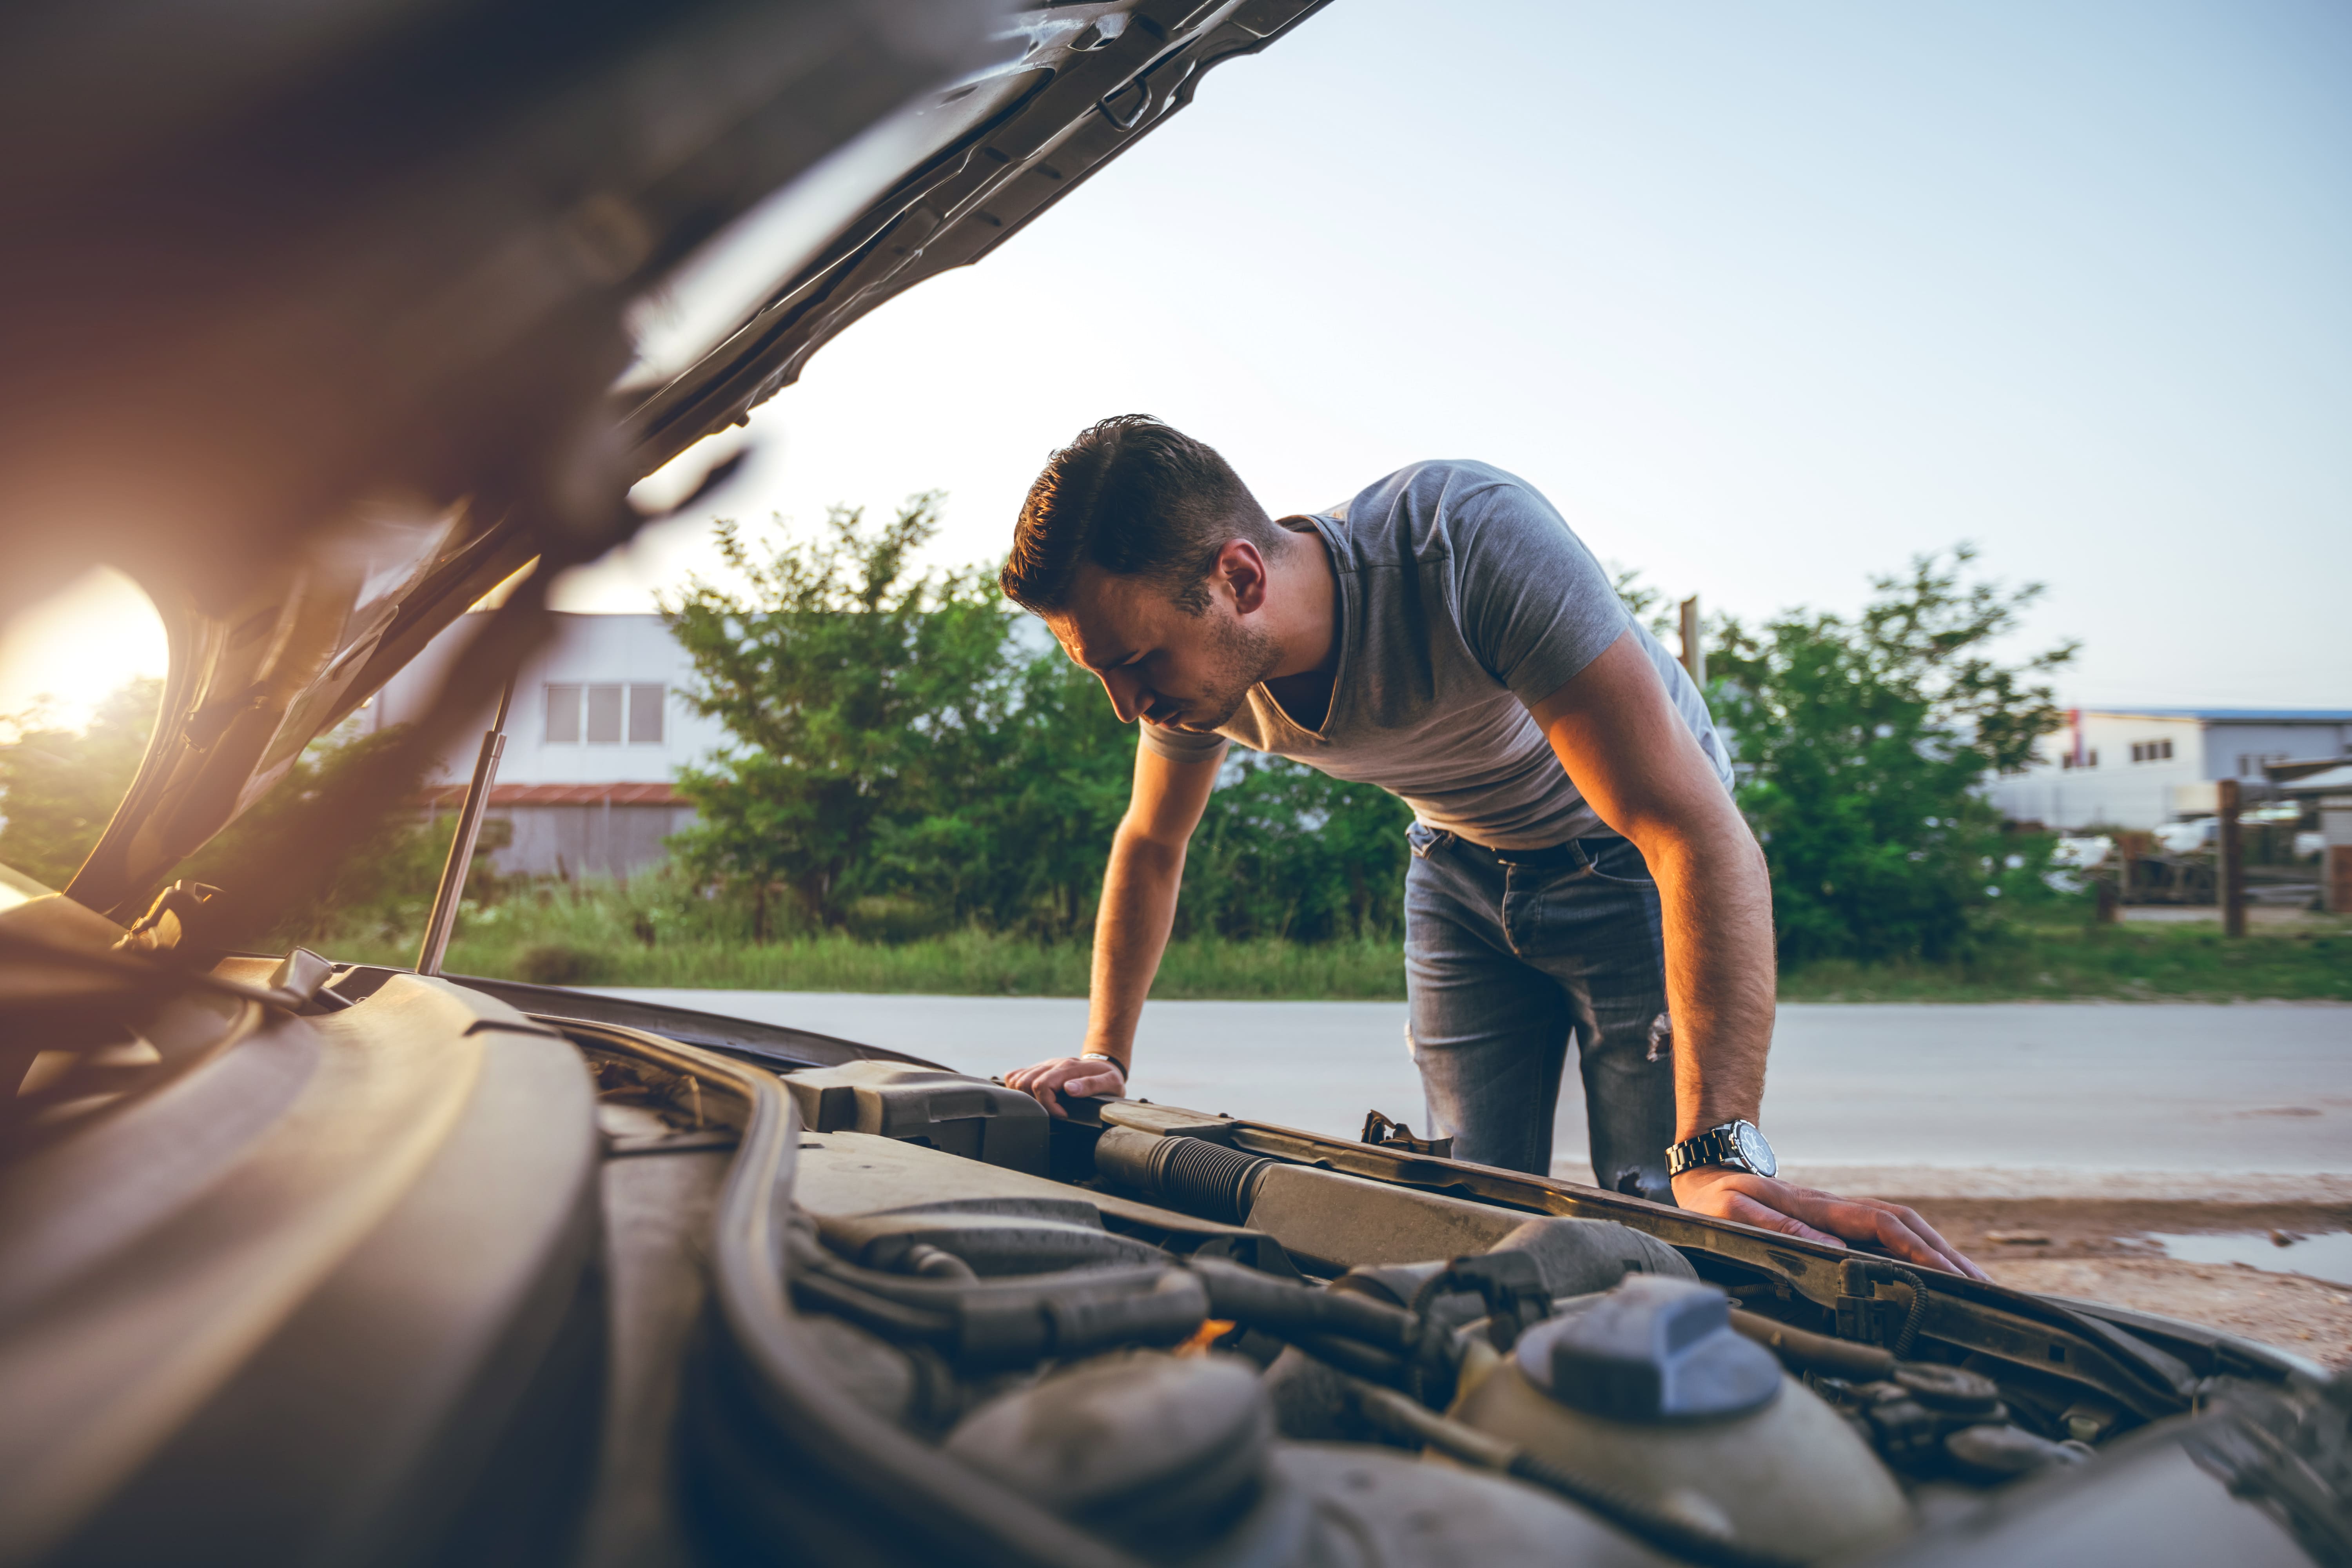 Your car’s not starting? Your battery might just need a jumpstart.